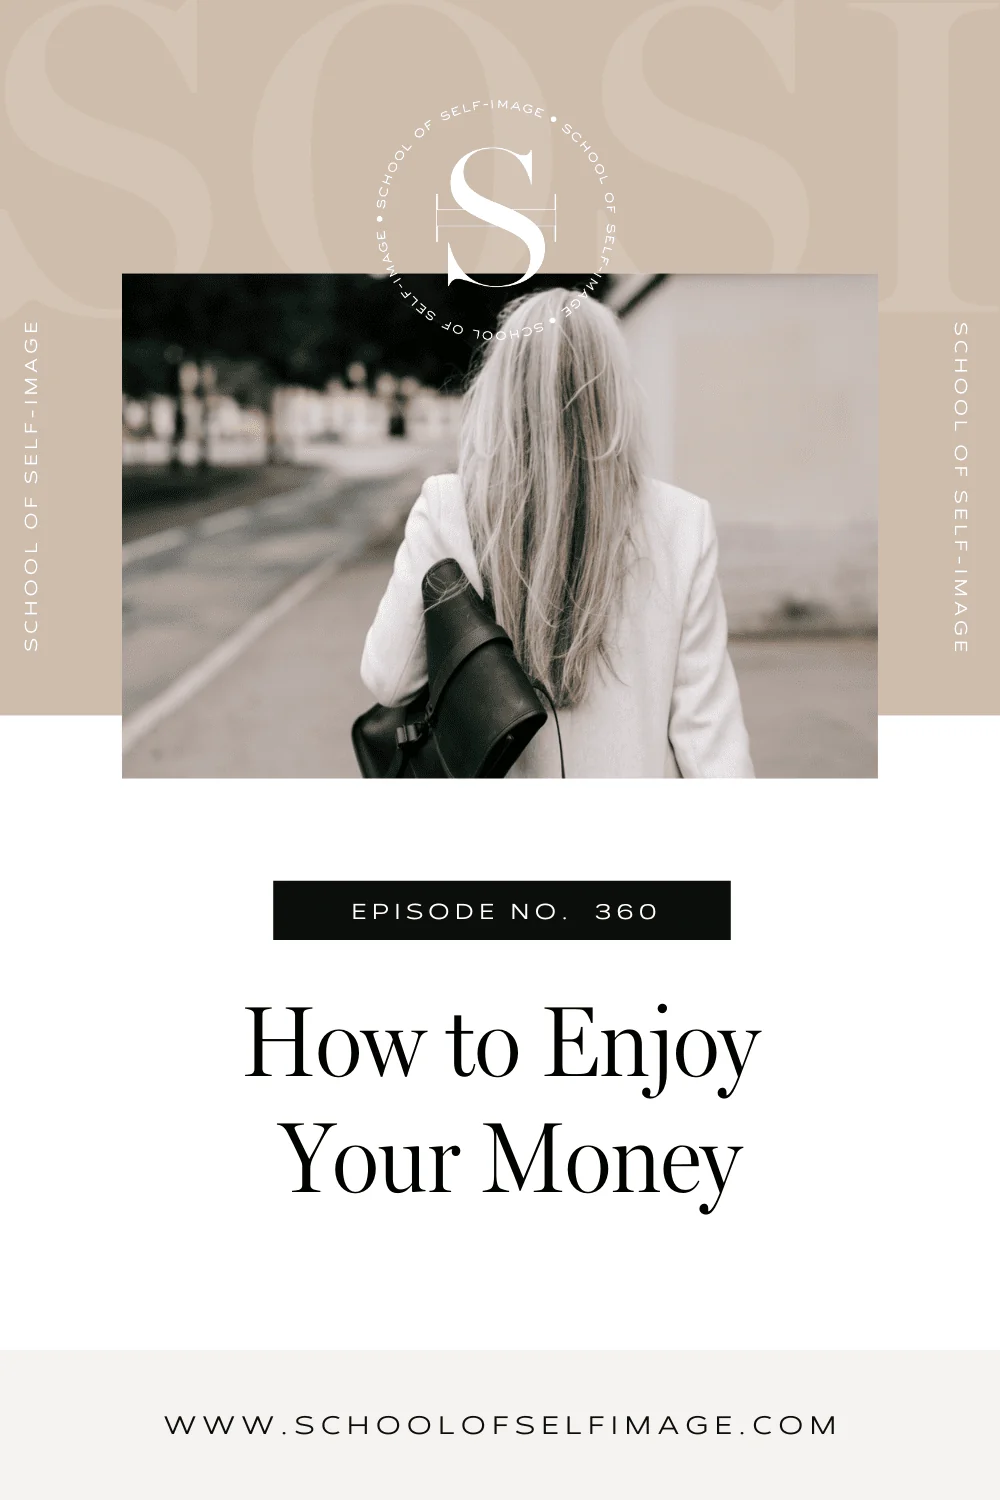 How to Enjoy Your Money